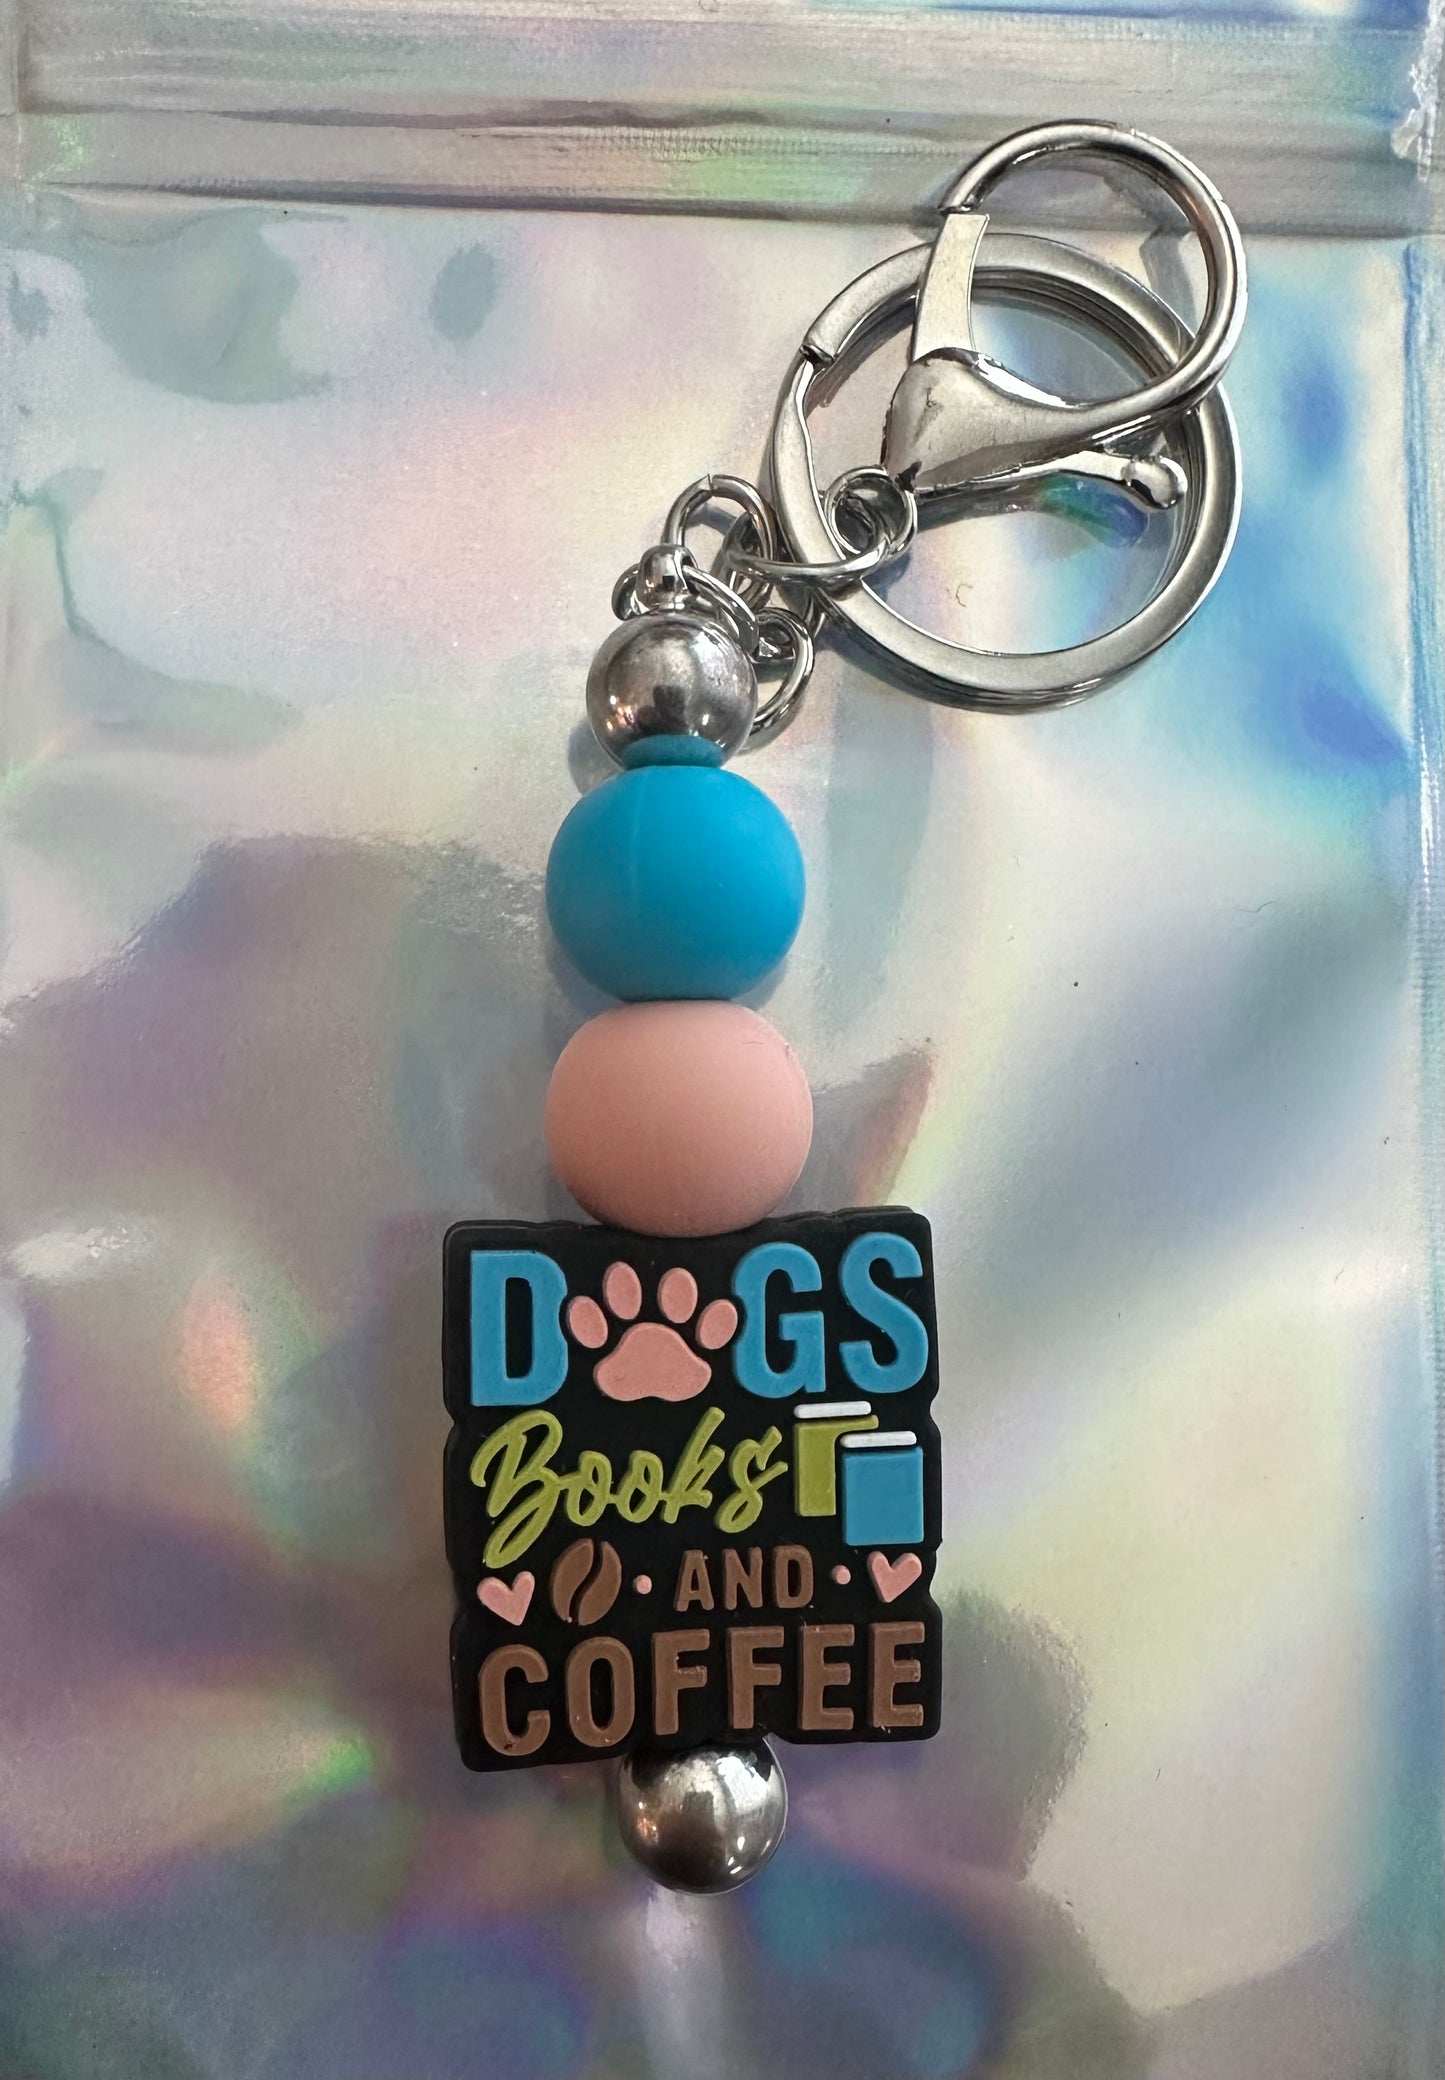 Dogs Books and coffee keychain